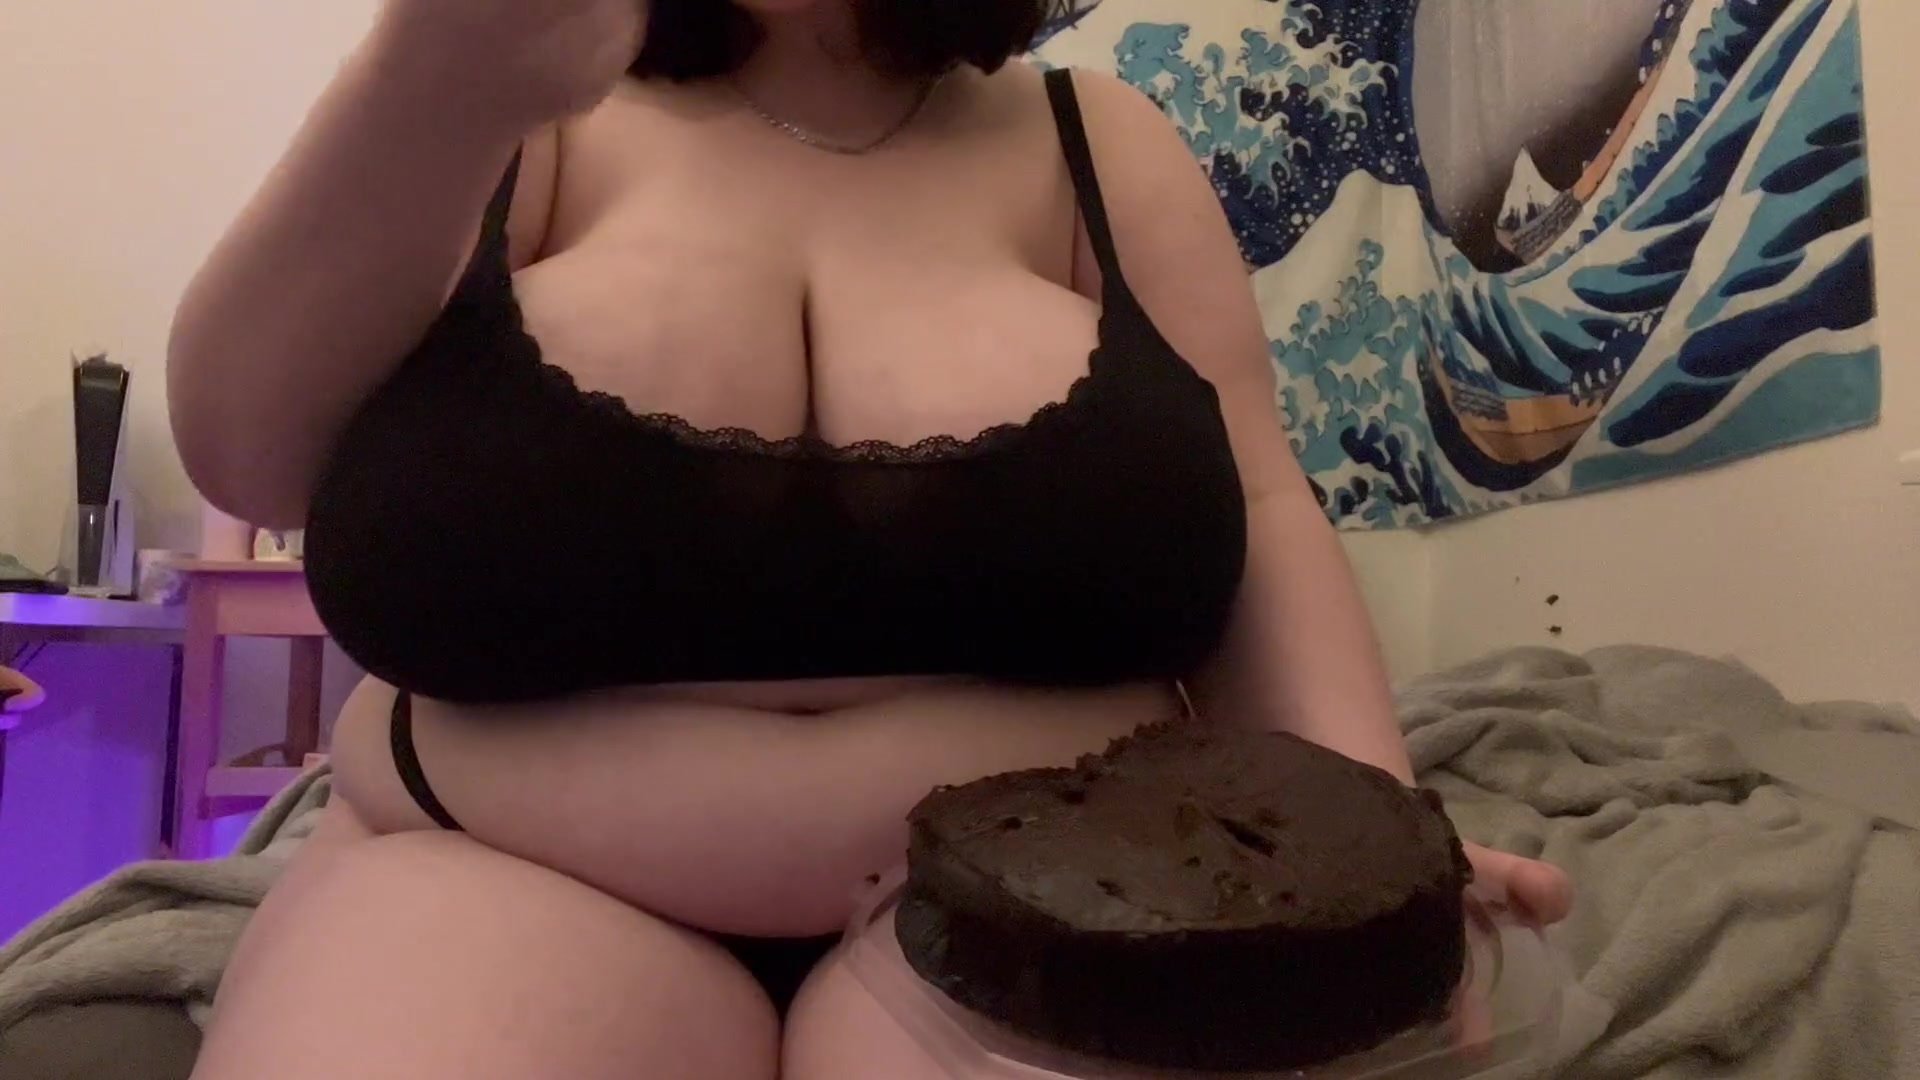 girl with Big boobs and a bigger belly devouring a cake